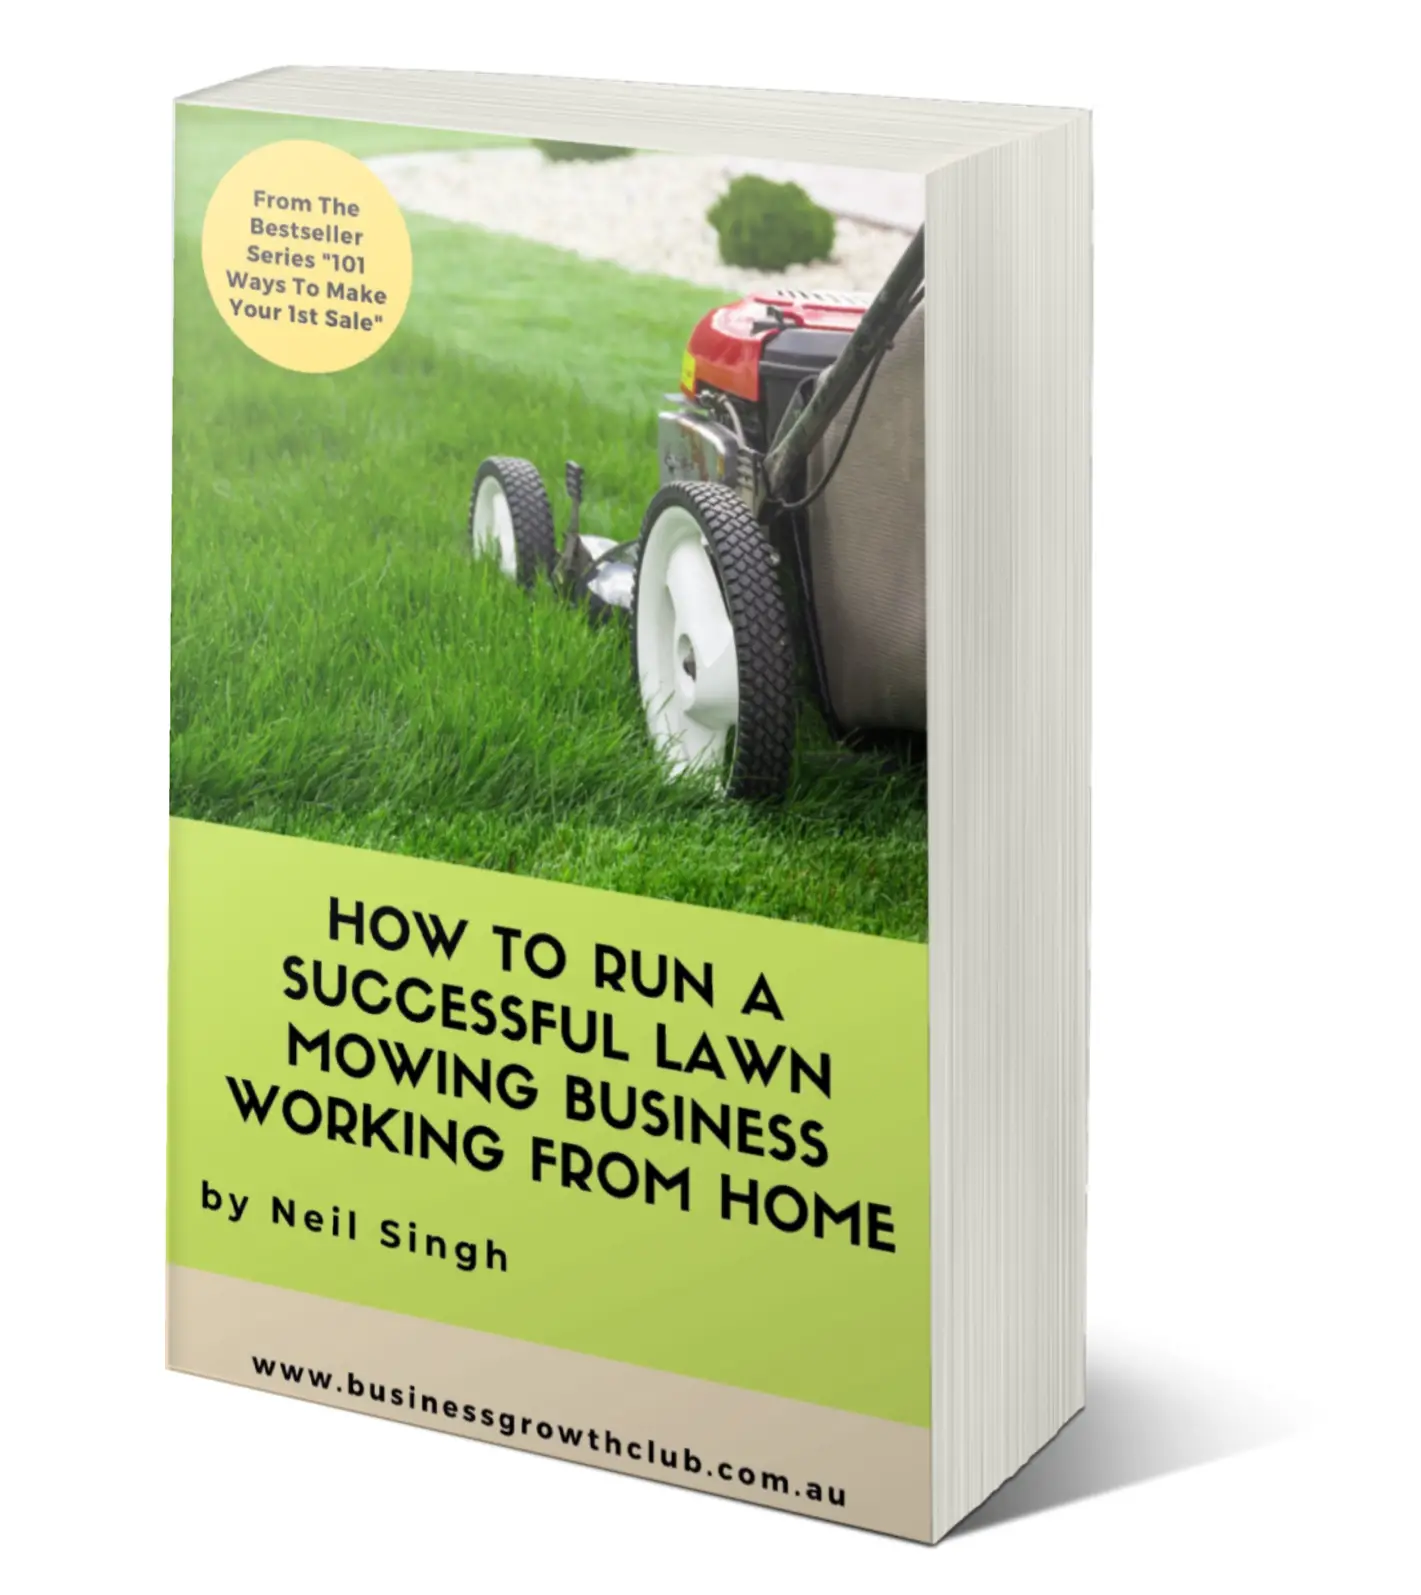 How To Start Up Lawn Care Business